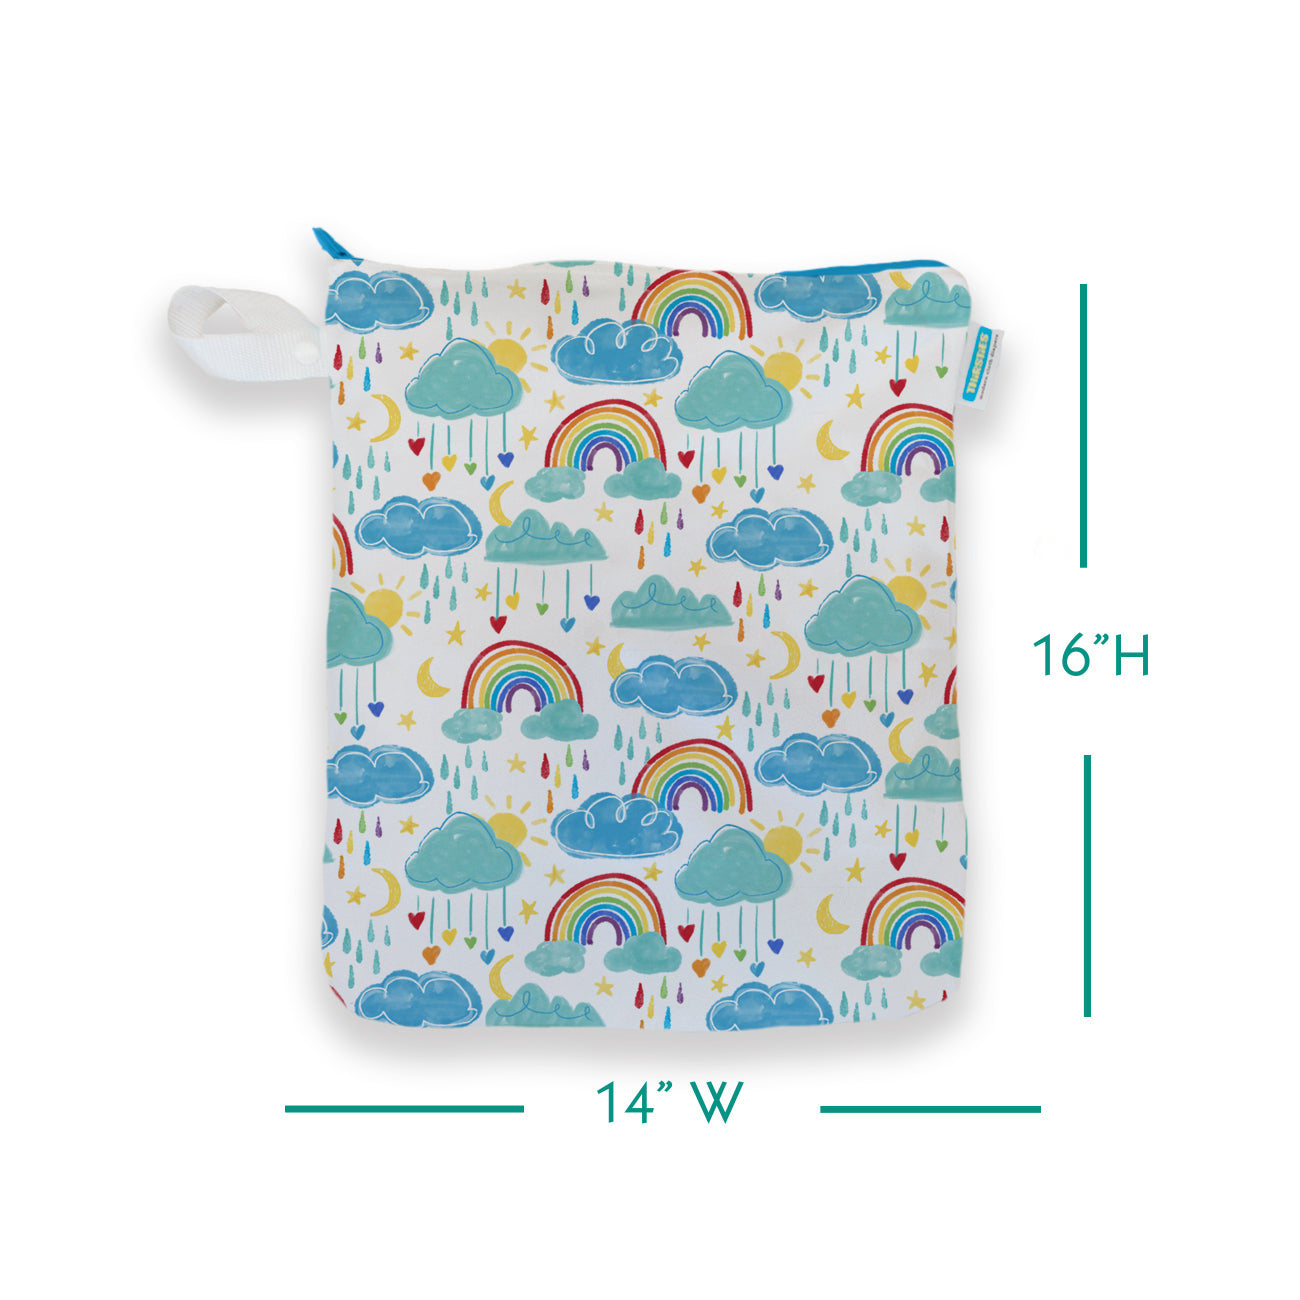 '-image of Thirsties Deluxe Wet Bag in Rainbow featuring measurements: 14"W x 16"H